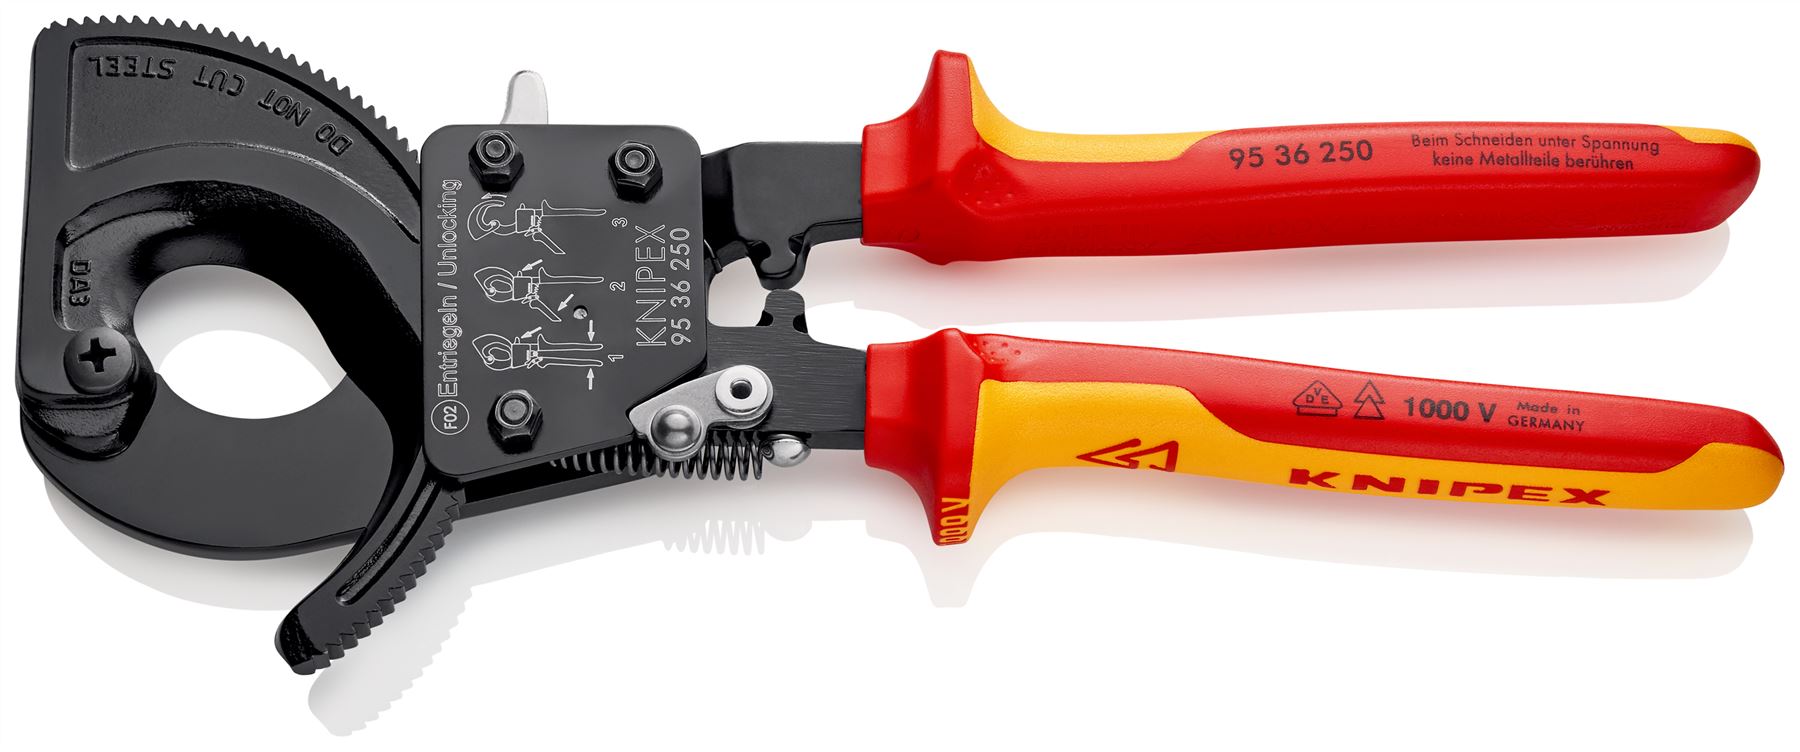 KNIPEX Cable Cutter Ratchet Action 32mm Diameter Cutting Capacity 250mm VDE Insulated Multi Component Grips 95 36 250